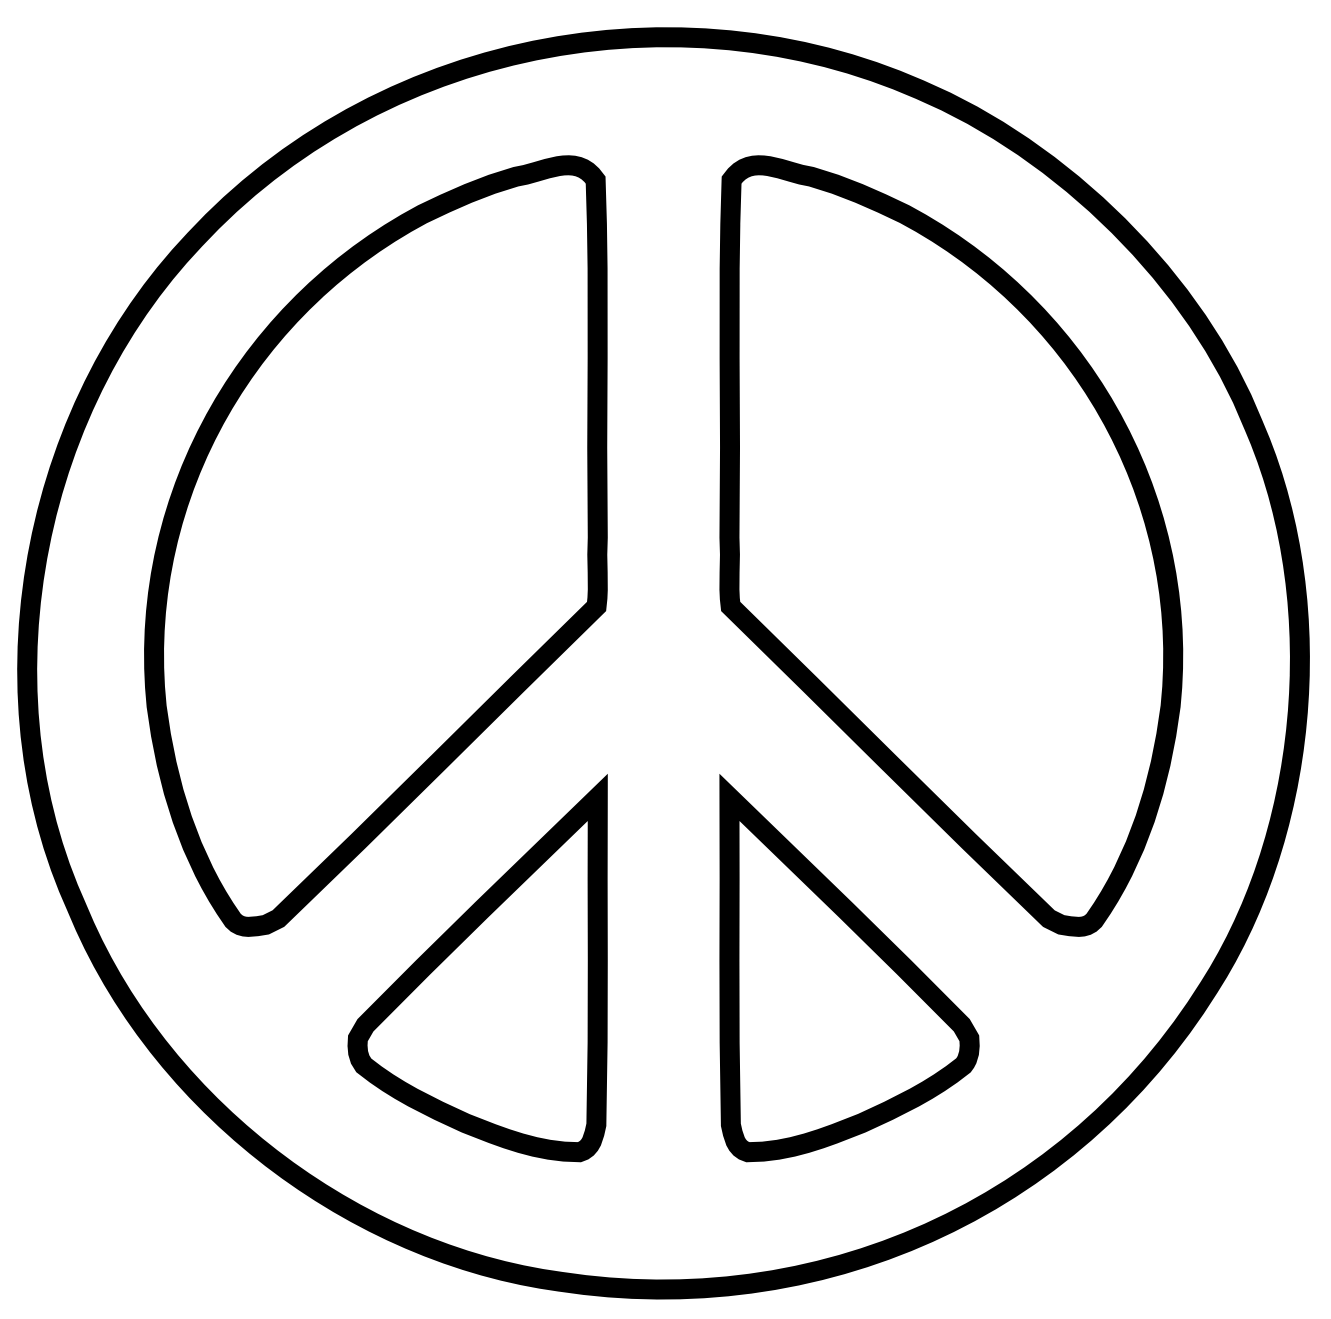 Peace sign images free clip art